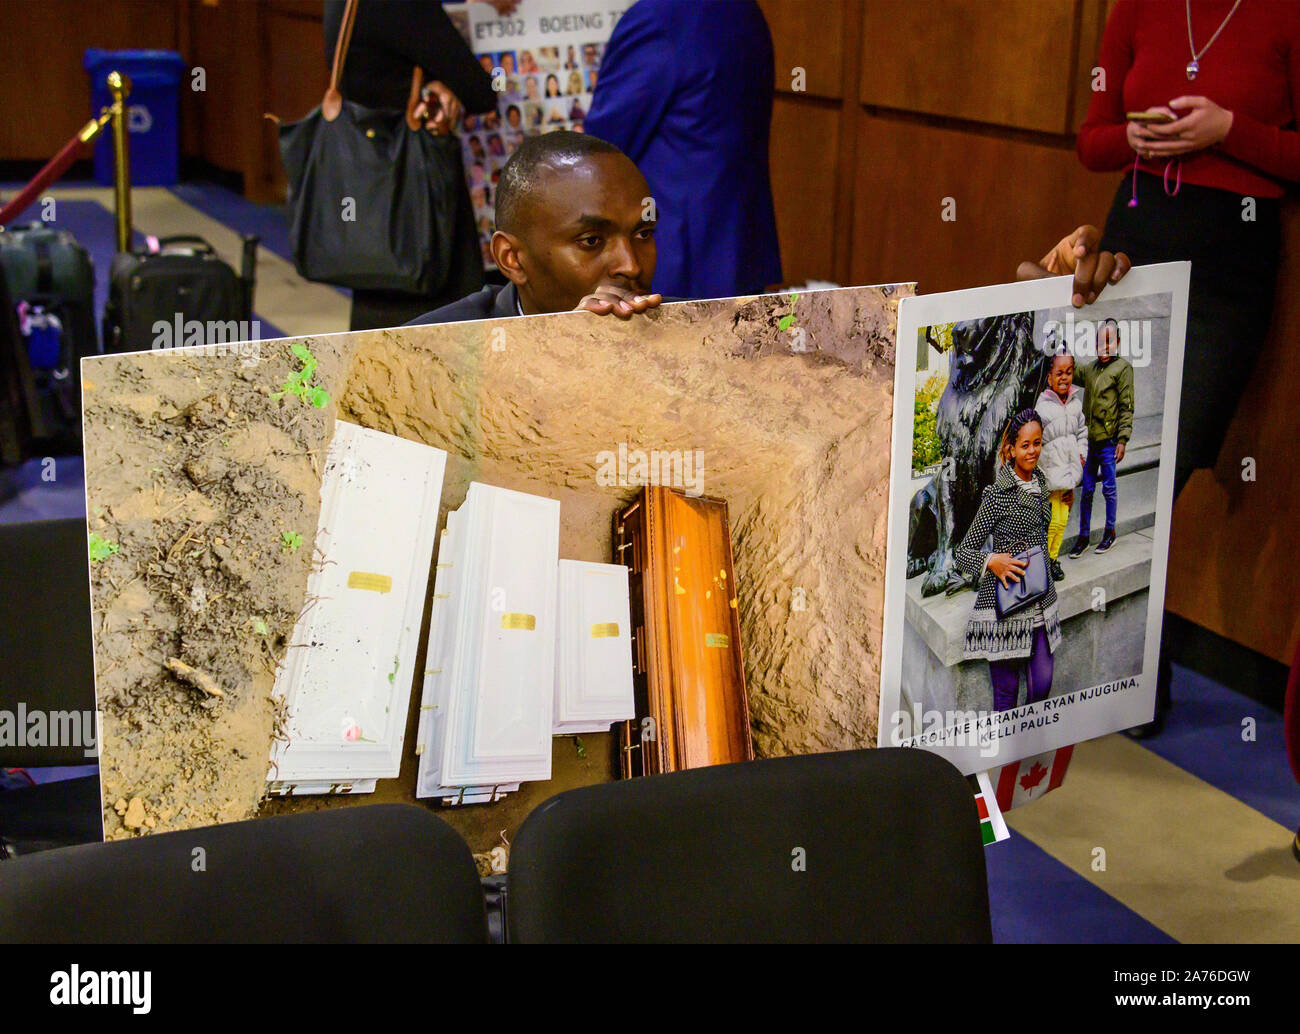 Washington, United States Of America. 29th Oct, 2019. Paul Njoroge, a father who lost his wife and three children in the crash of on Ethiopia Airlines Flight 302 holds photos of his children and their coffins in a grave prior to Dennis Muilenburg, President and Chief Executive Officer, The Boeing Company and John Hamilton, Vice President and Chief Engineer, Boeing Commercial Airplanes, giving testimony before the United States Senate Commerce, Science, and Transportation on 'Aviation safety and the future of Boeing's 737 MAX' on Capitol Hill in Washington, DC on Tuesday, October 29, 2019.Credi Stock Photo